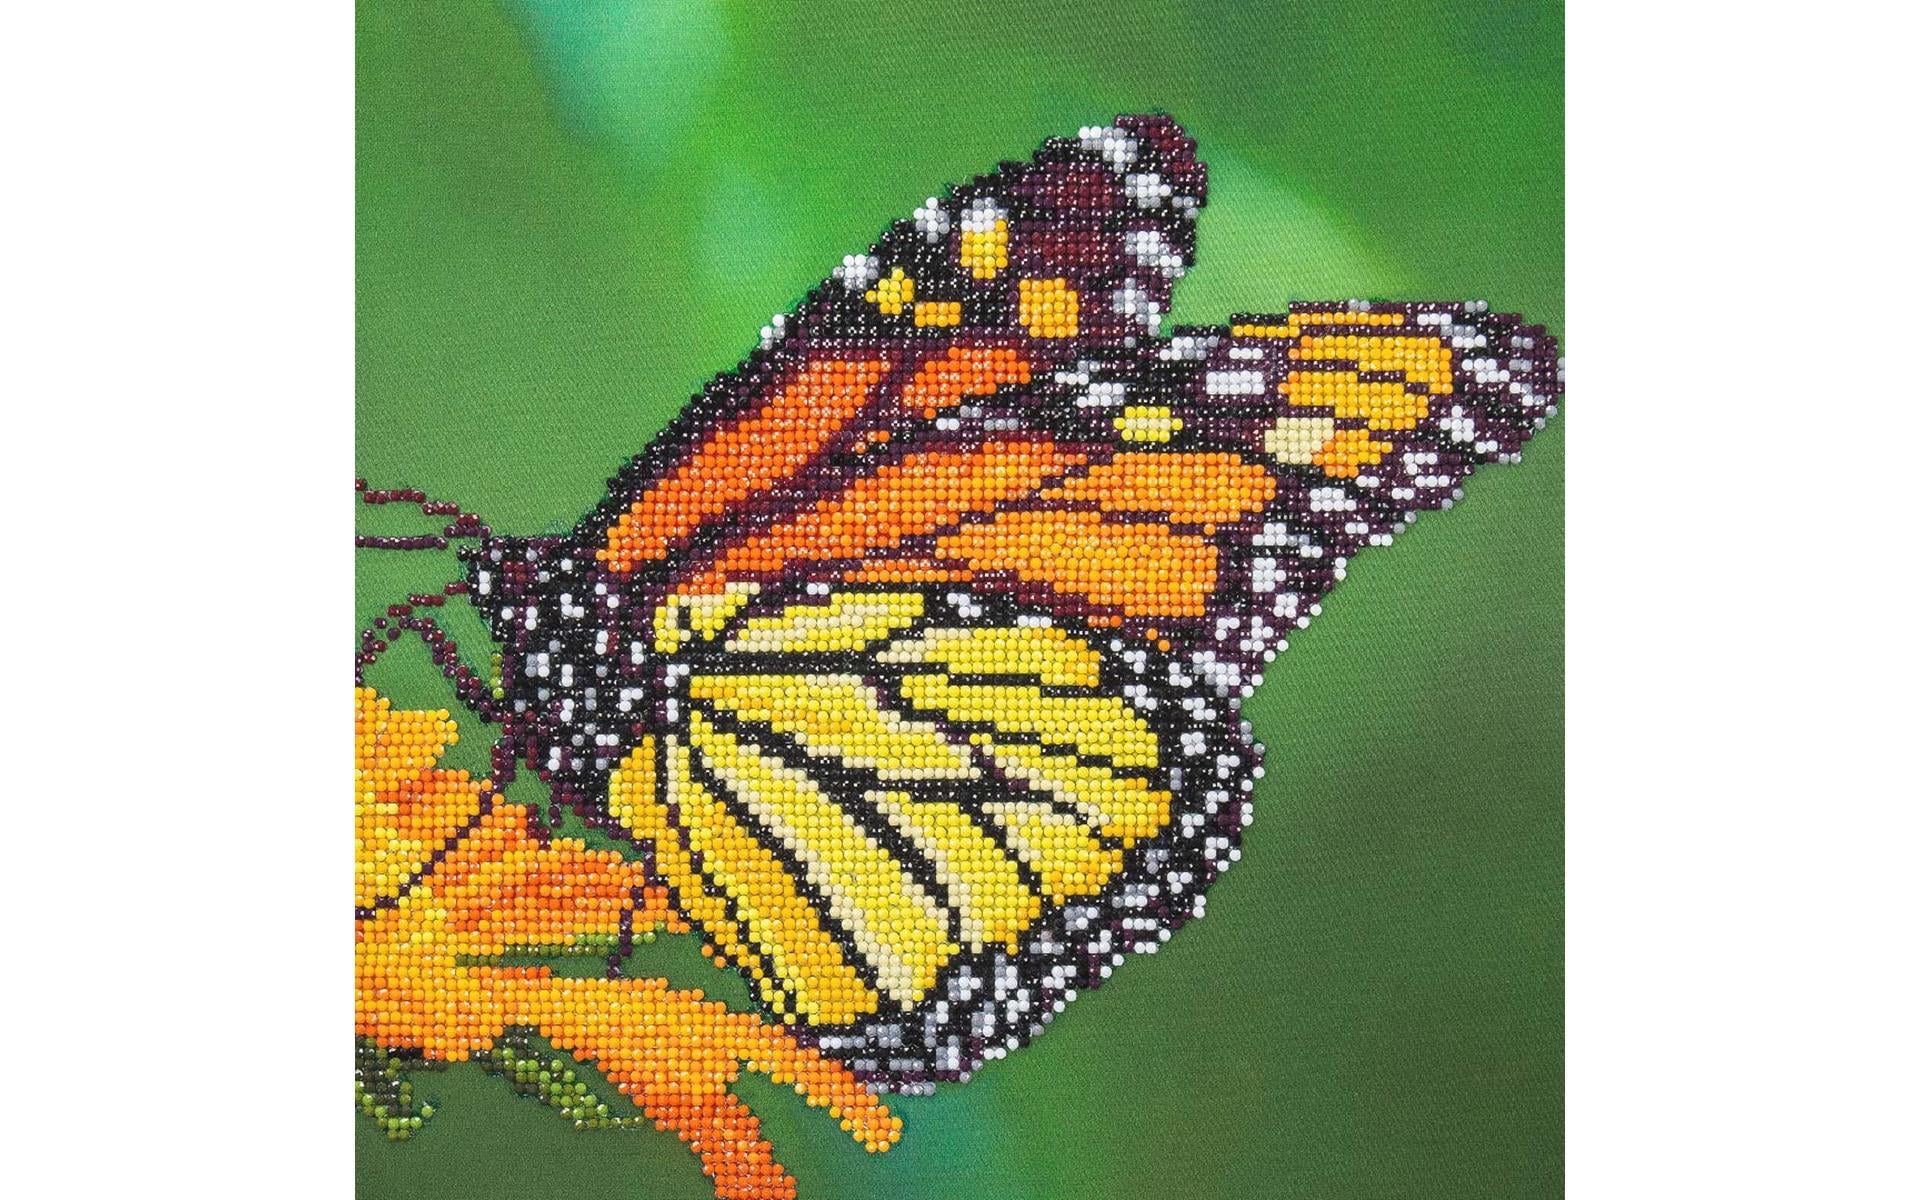 Full Dimond 100% 5D DIY Diamond Painting Kit Full Drill Diamond Painting  Sets for Adult or Kid,Butterfly Pattern Diamond Embroidery